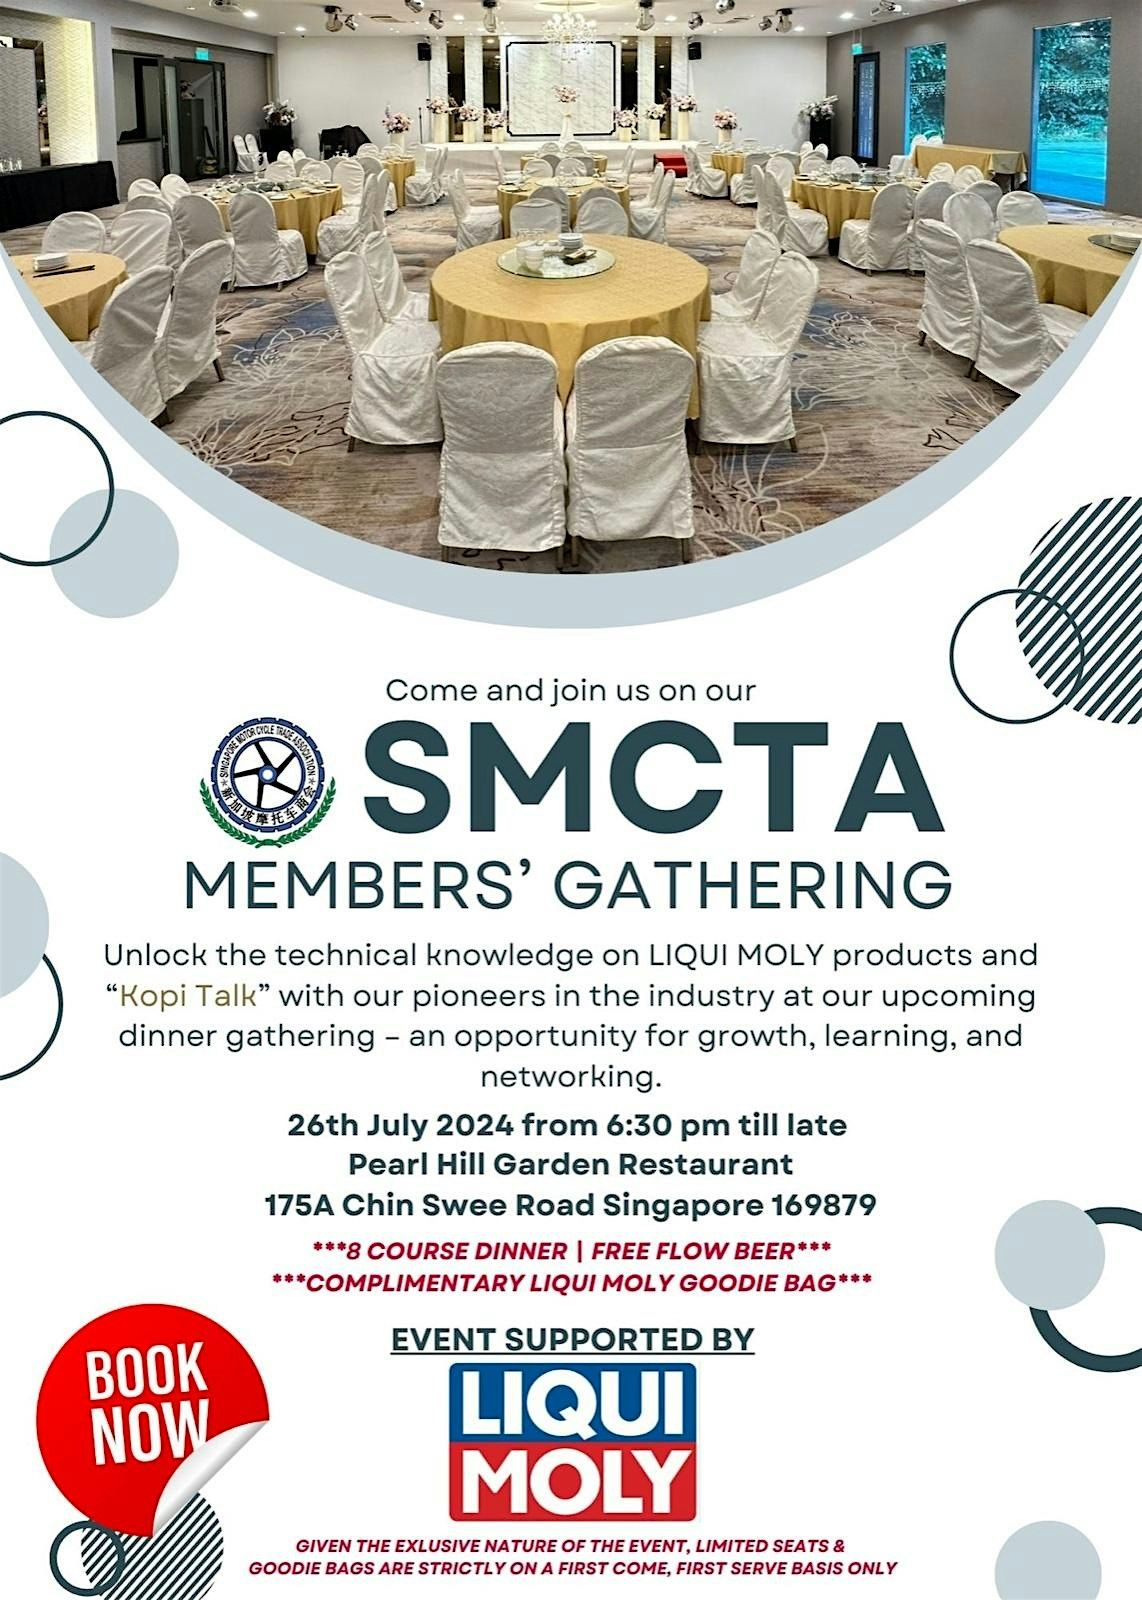 SMCTA Members' Gathering - July 2024 (Supported by Liqui Moly Singapore)